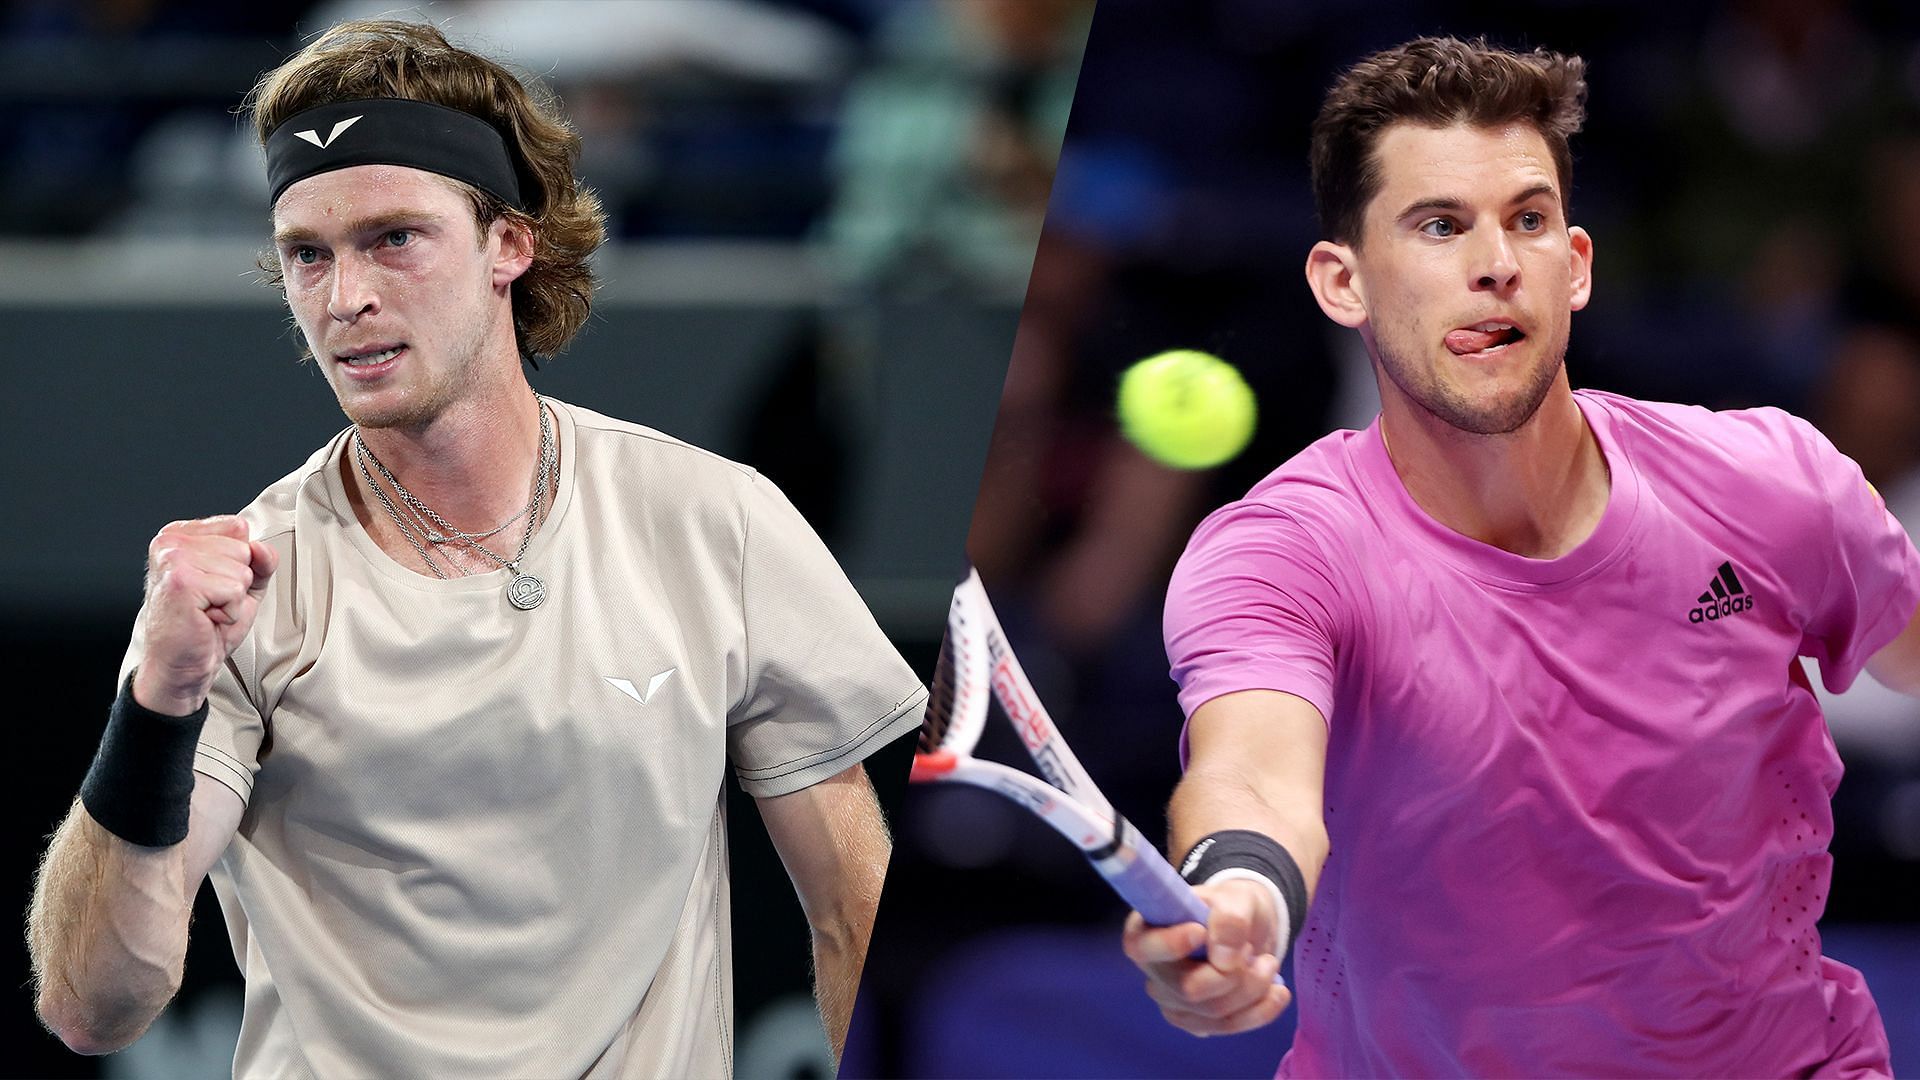 Australian Open 2023 Andrey Rublev vs Dominic Thiem preview, head-to-head, prediction, odds and pick